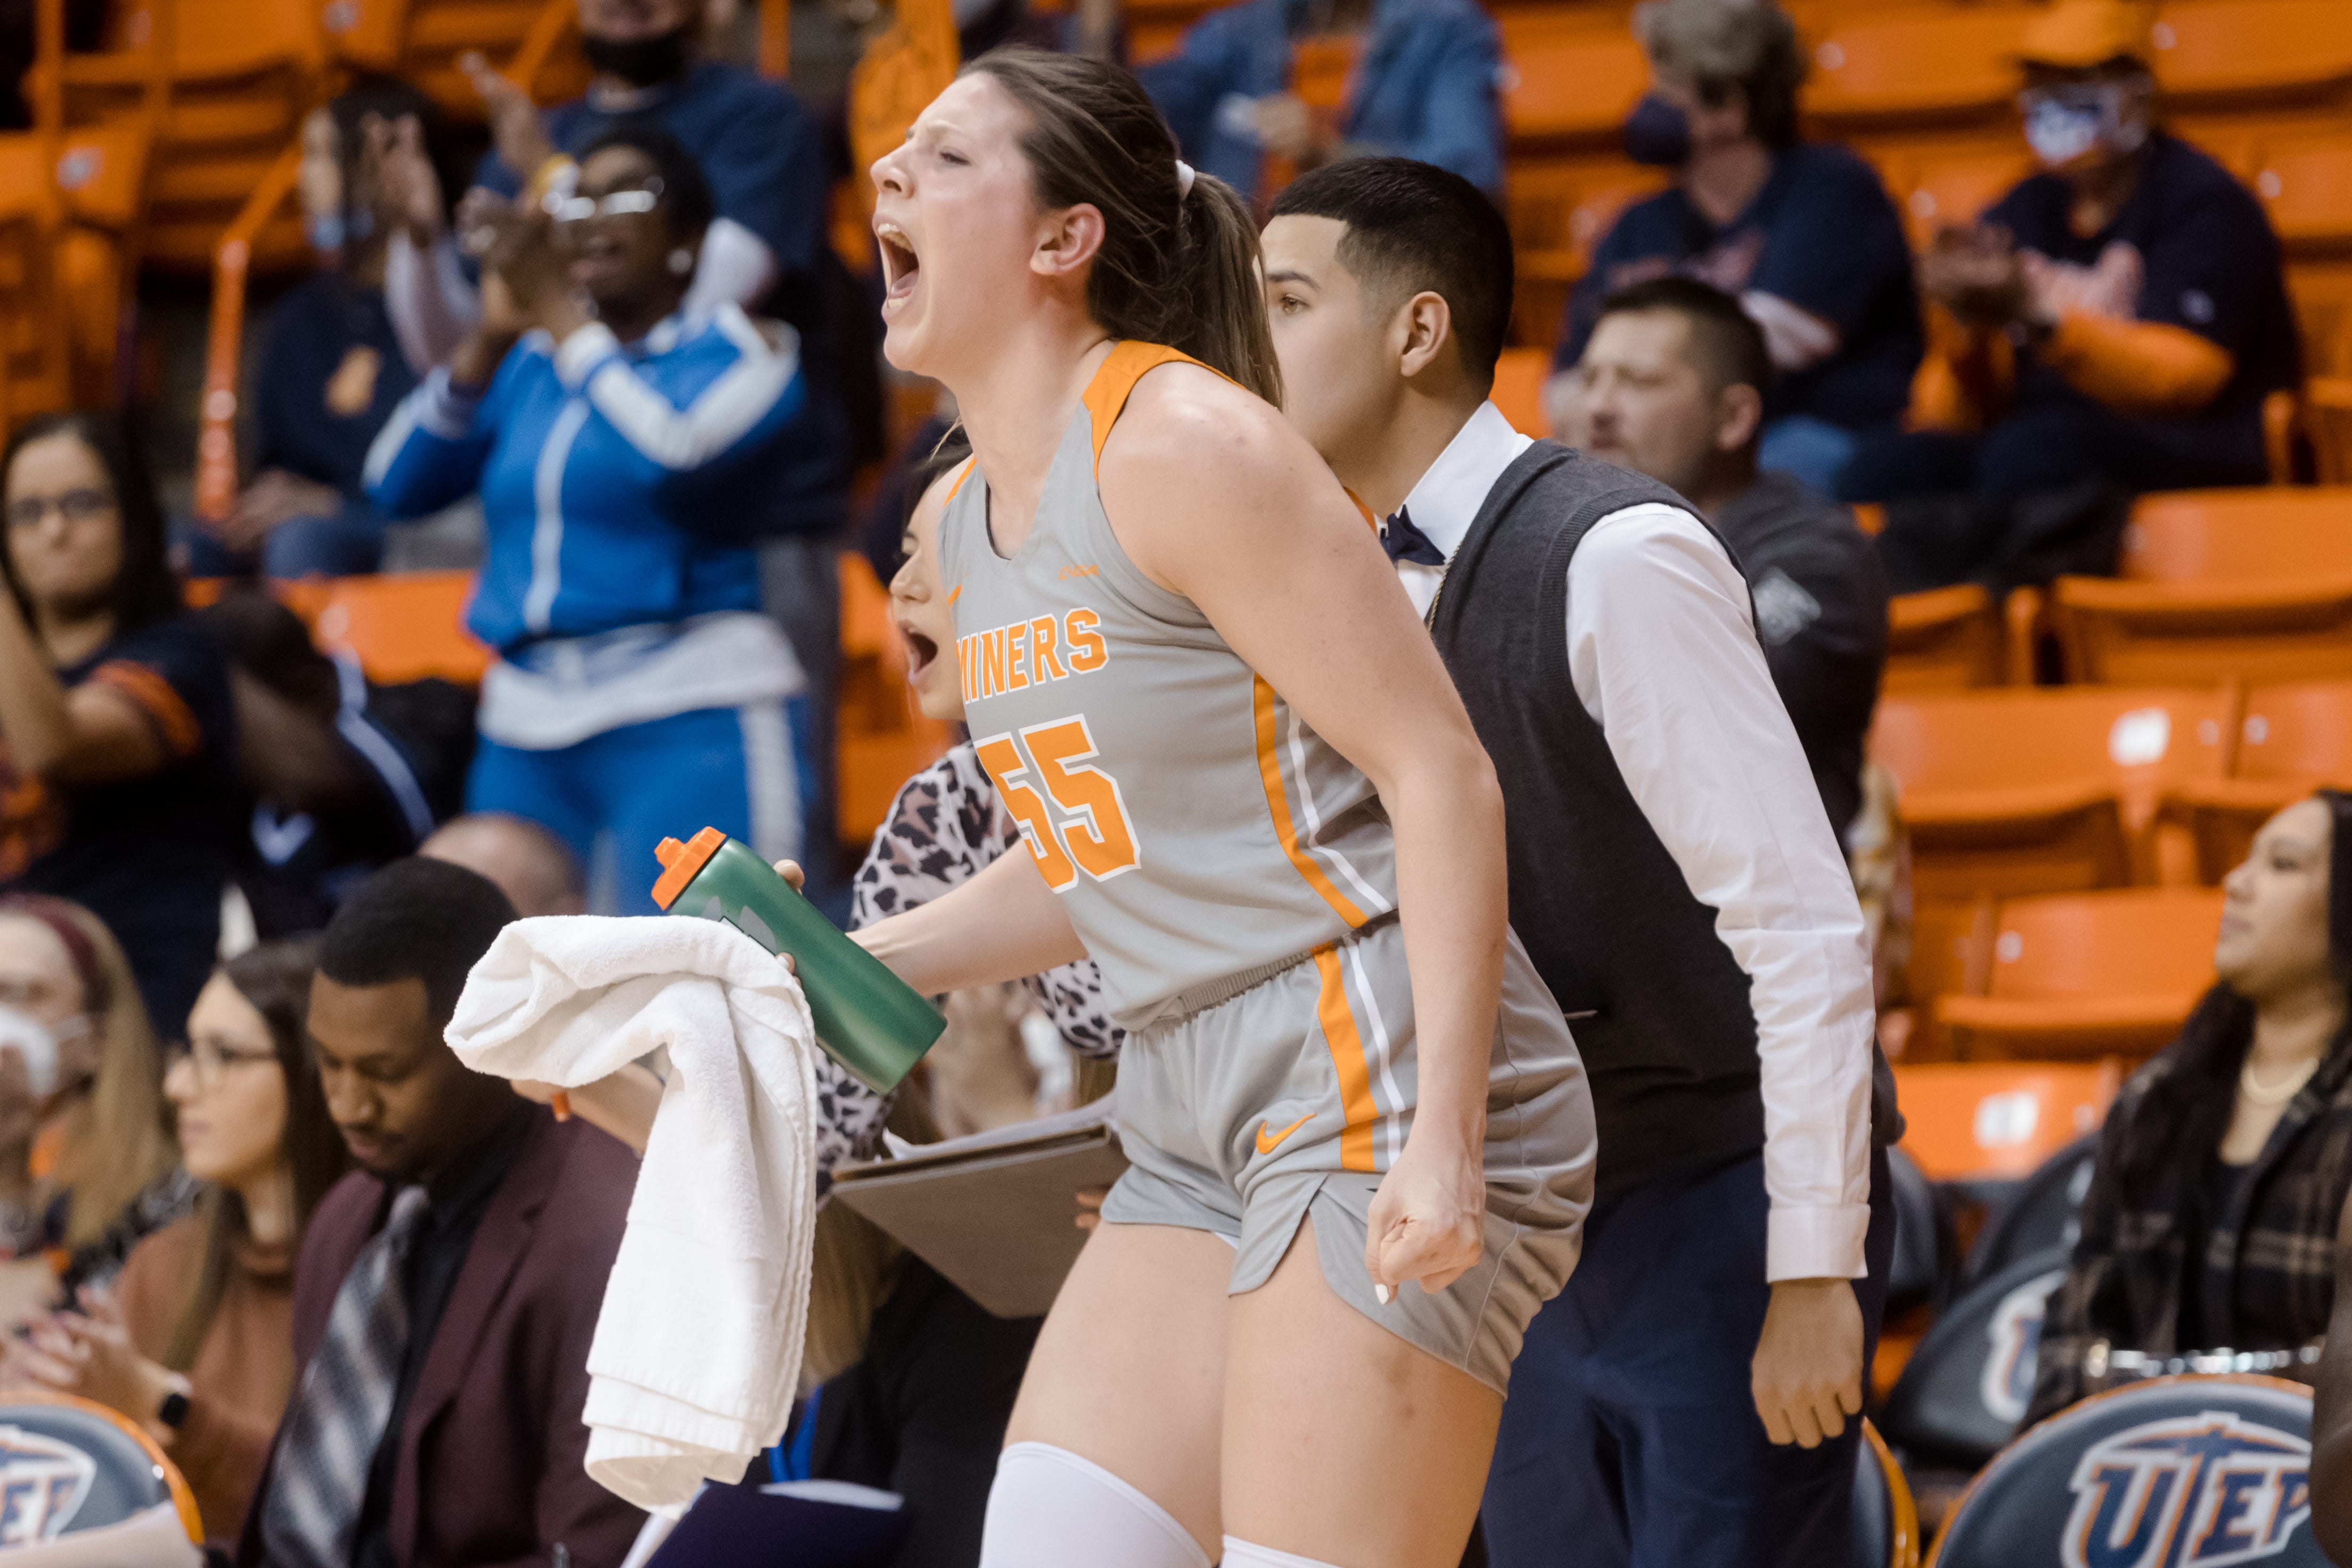 UTEP women win crunch time to upset Old Dominion, 53-48